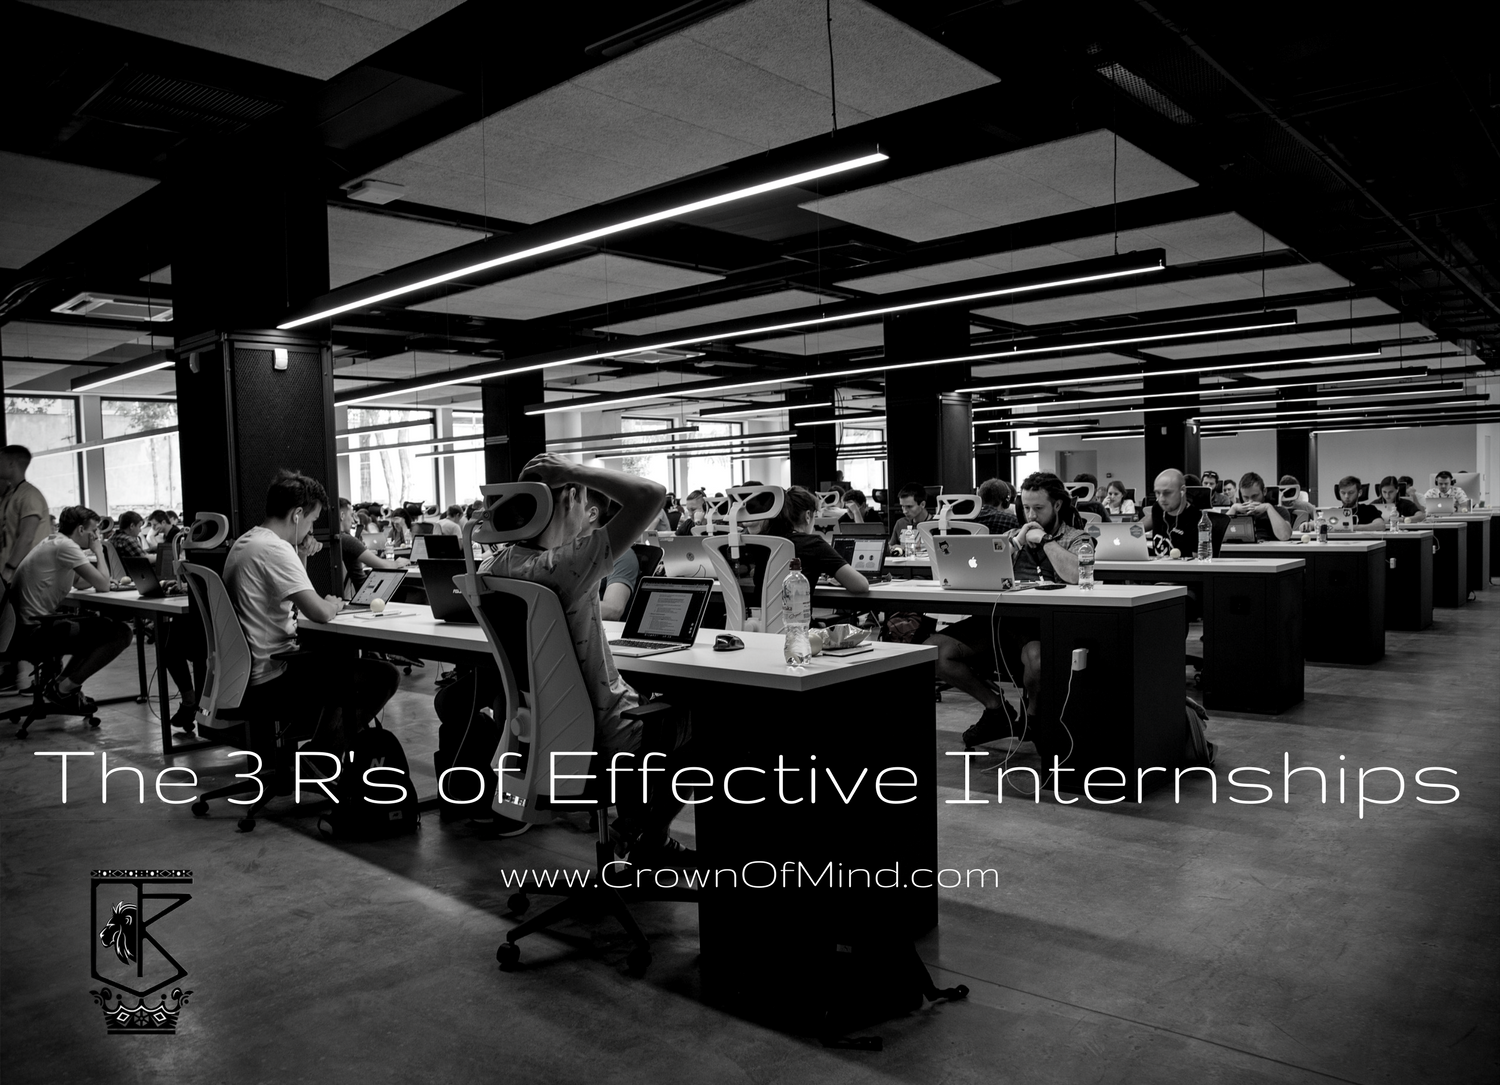 The 3 R’s of Effective Internships